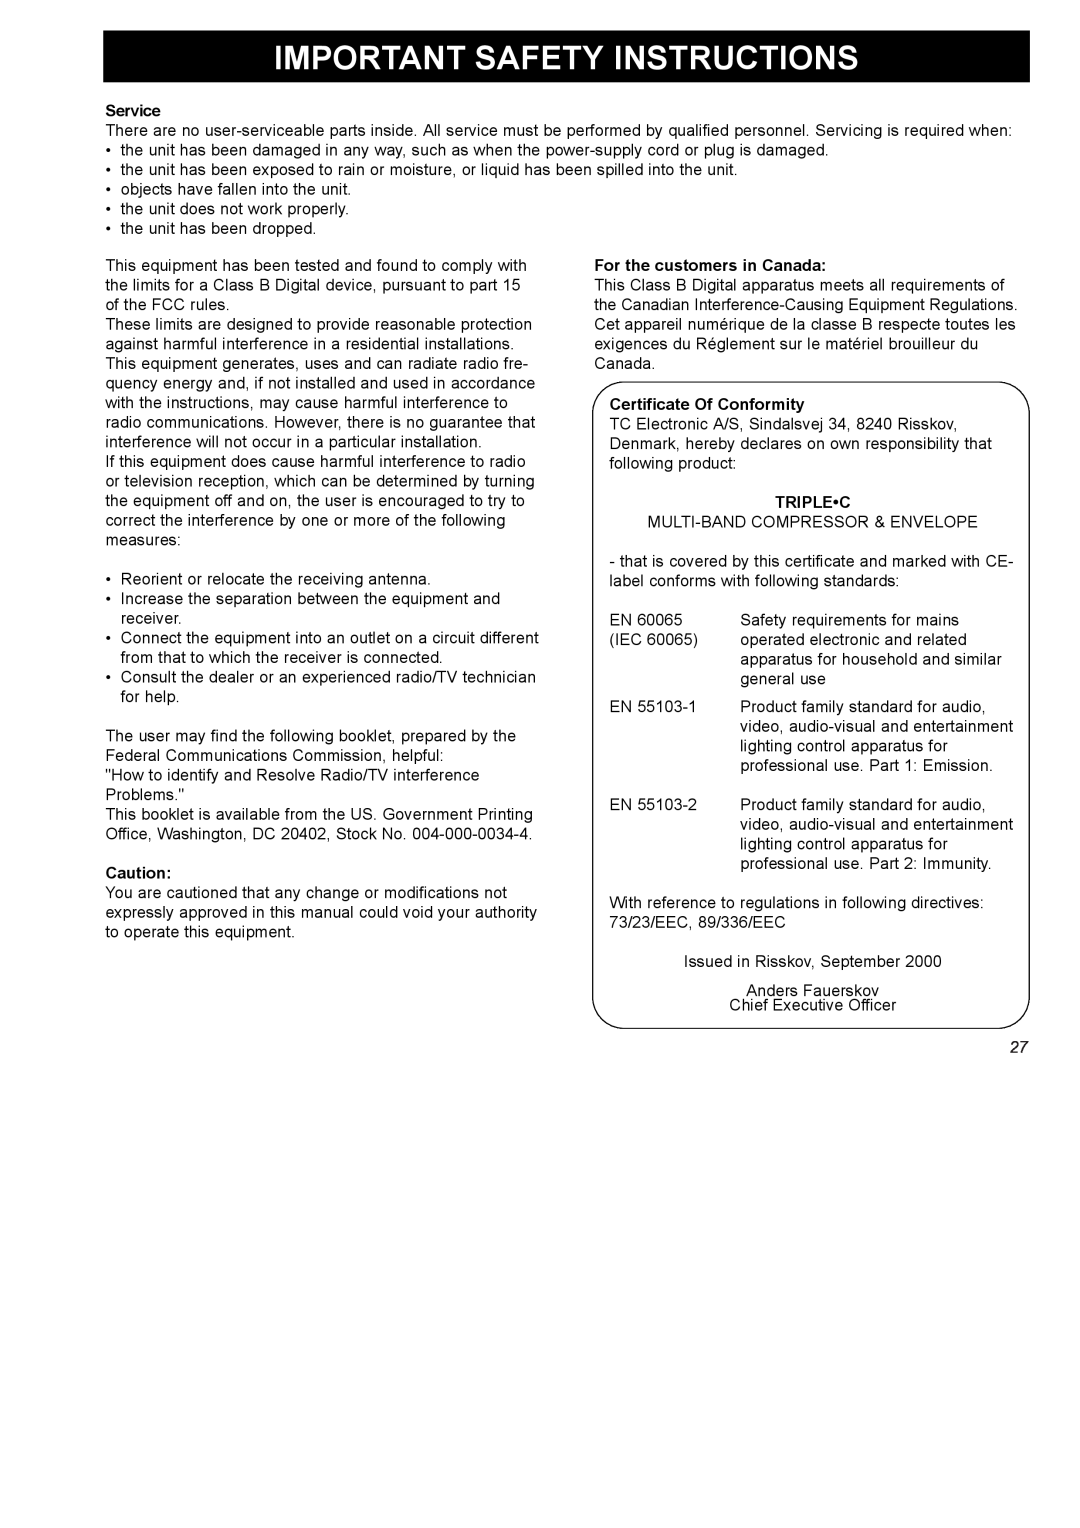 TC electronic SDN BHD SDN BHD user manual Important Safety Instructions, Service, For the customers in Canada, Triplec 